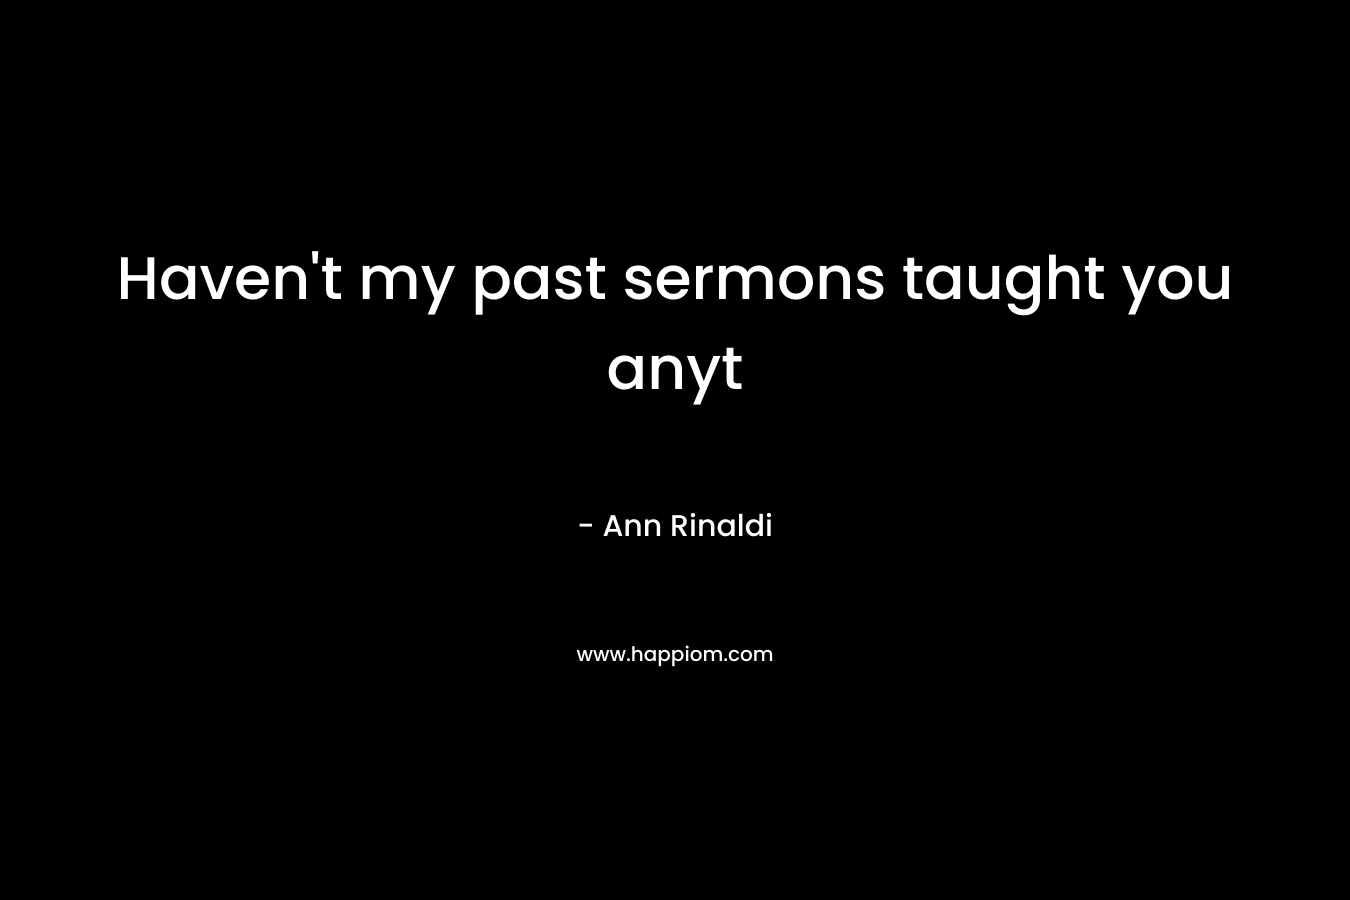 Haven’t my past sermons taught you anyt – Ann Rinaldi